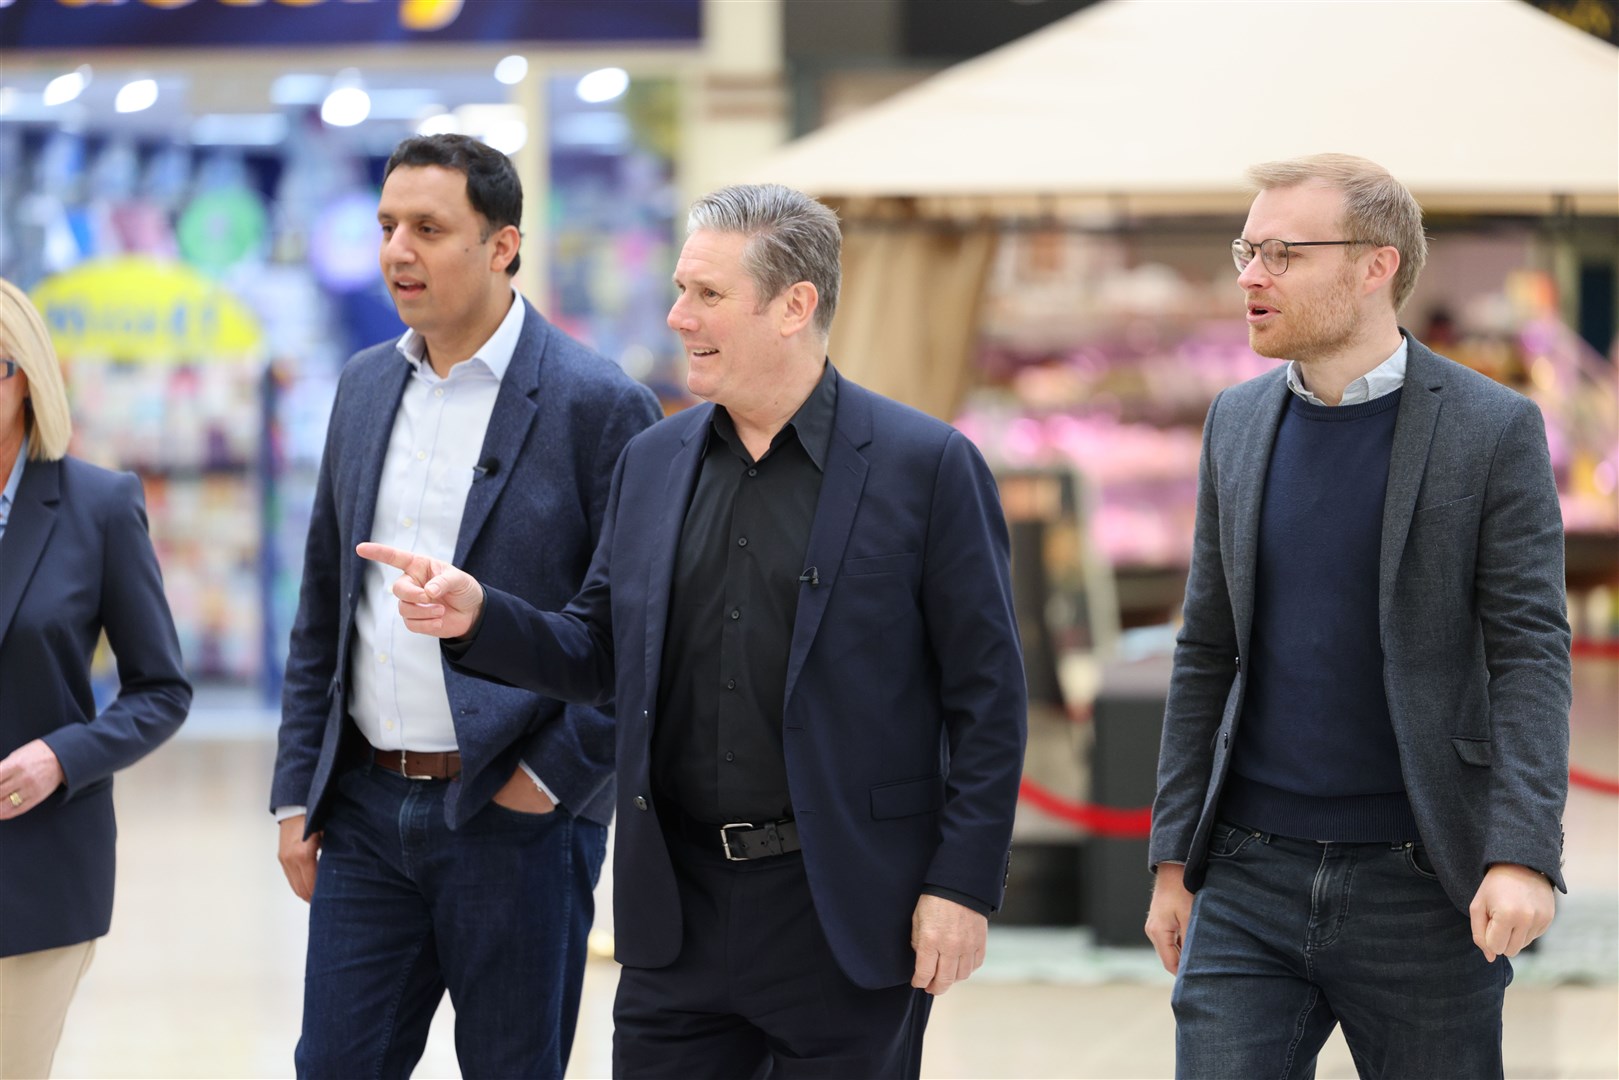 Michael Shanks, the party’s candidate in the upcoming by-election, pictured right with Sir Keir Starmer and Anas Sarwar, has voiced his opposition to some UK Labour stances (Robert Perry/PA)